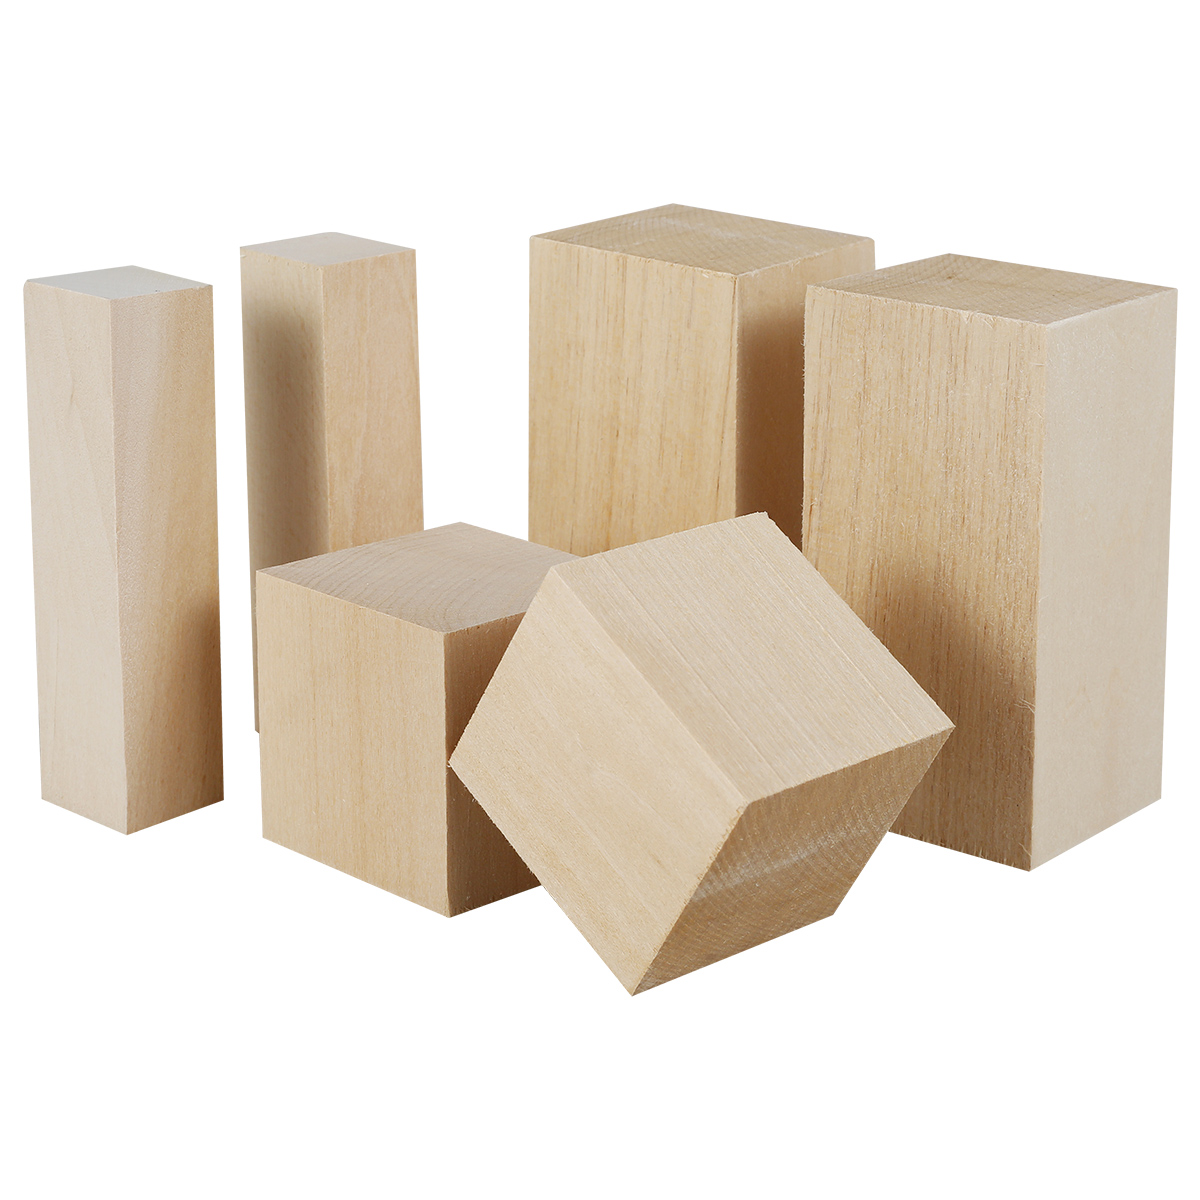 verlacod 6Pcs Basswood Carving Block Natural Smooth Wood Carving Block  Portable Unfinished Wood Block Carving Whittling Art Supplies for Beginner